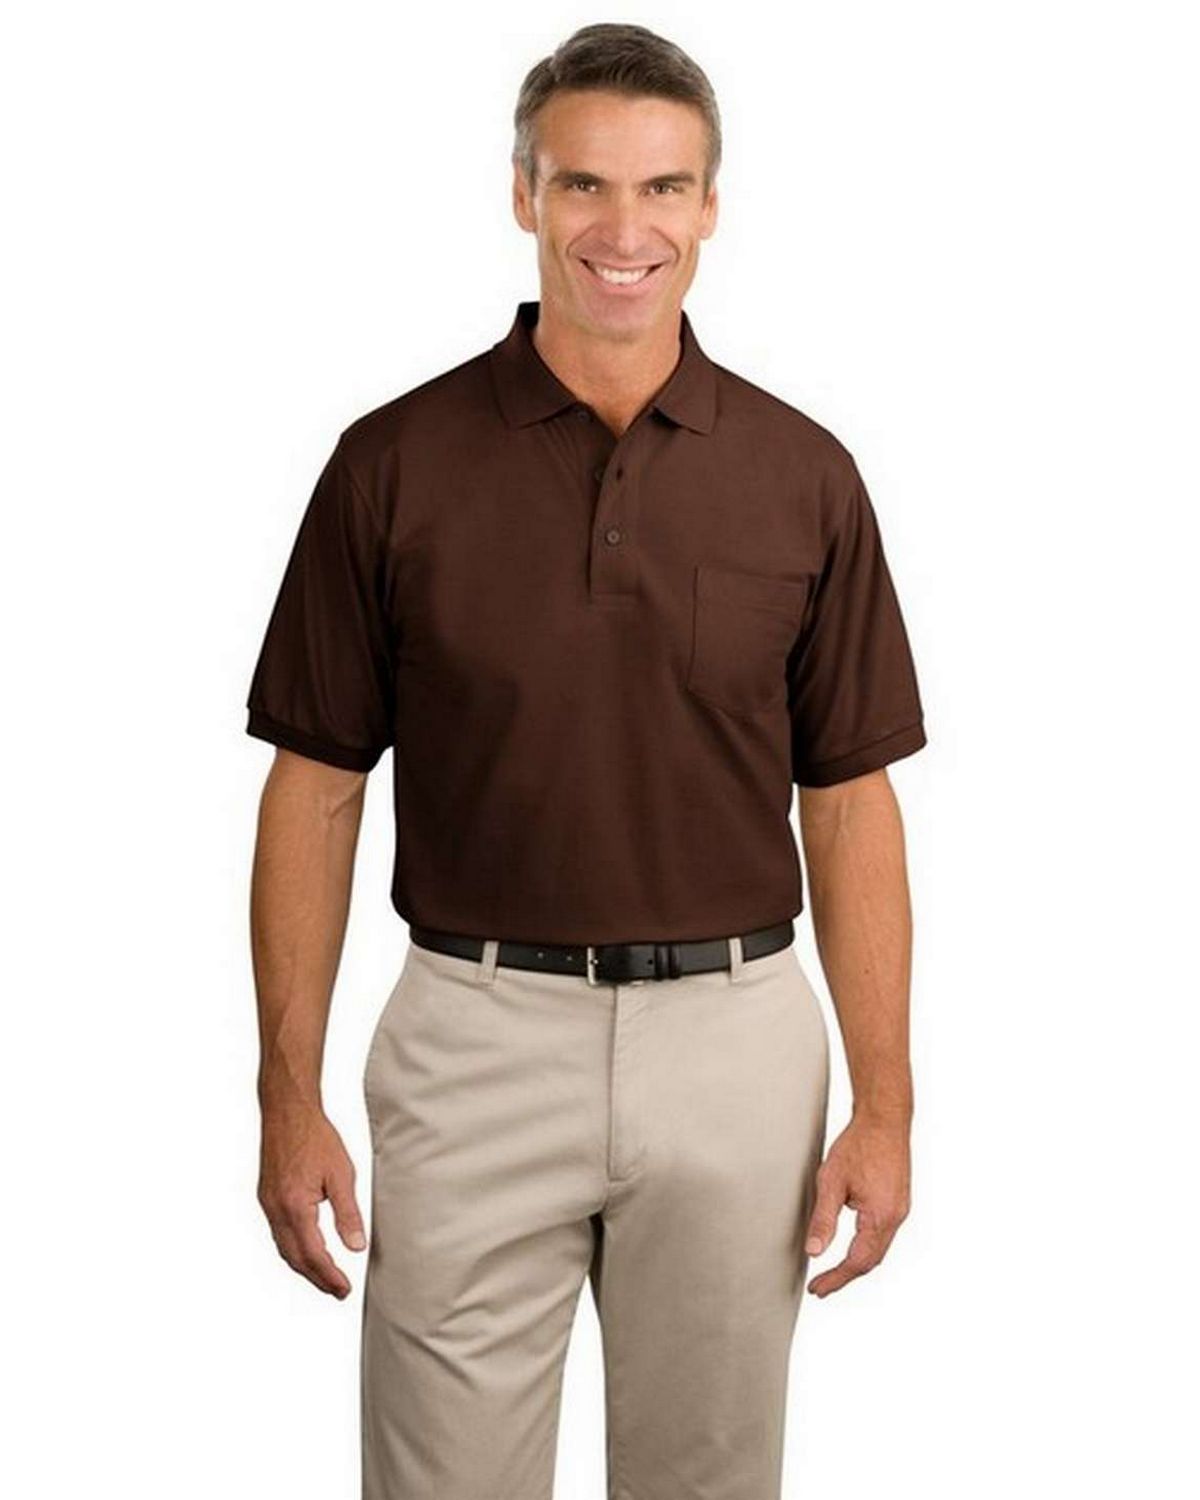 Port Authority TLK500P Tall Silk Touch Polo with Pocket